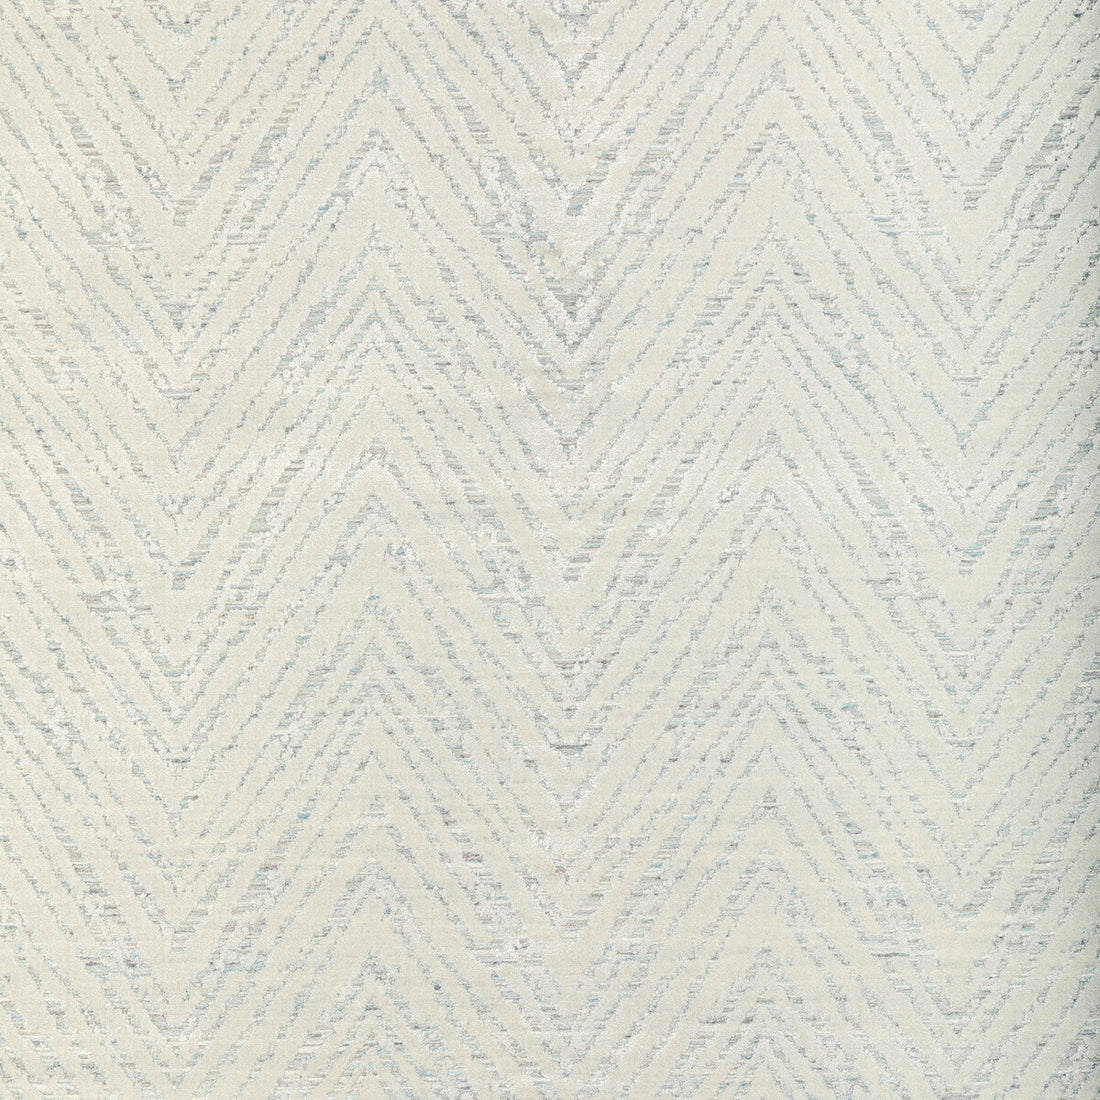 Gorge Hike fabric in pearl color - pattern 36365.11.0 - by Kravet Design in the Jeffrey Alan Marks Seascapes collection